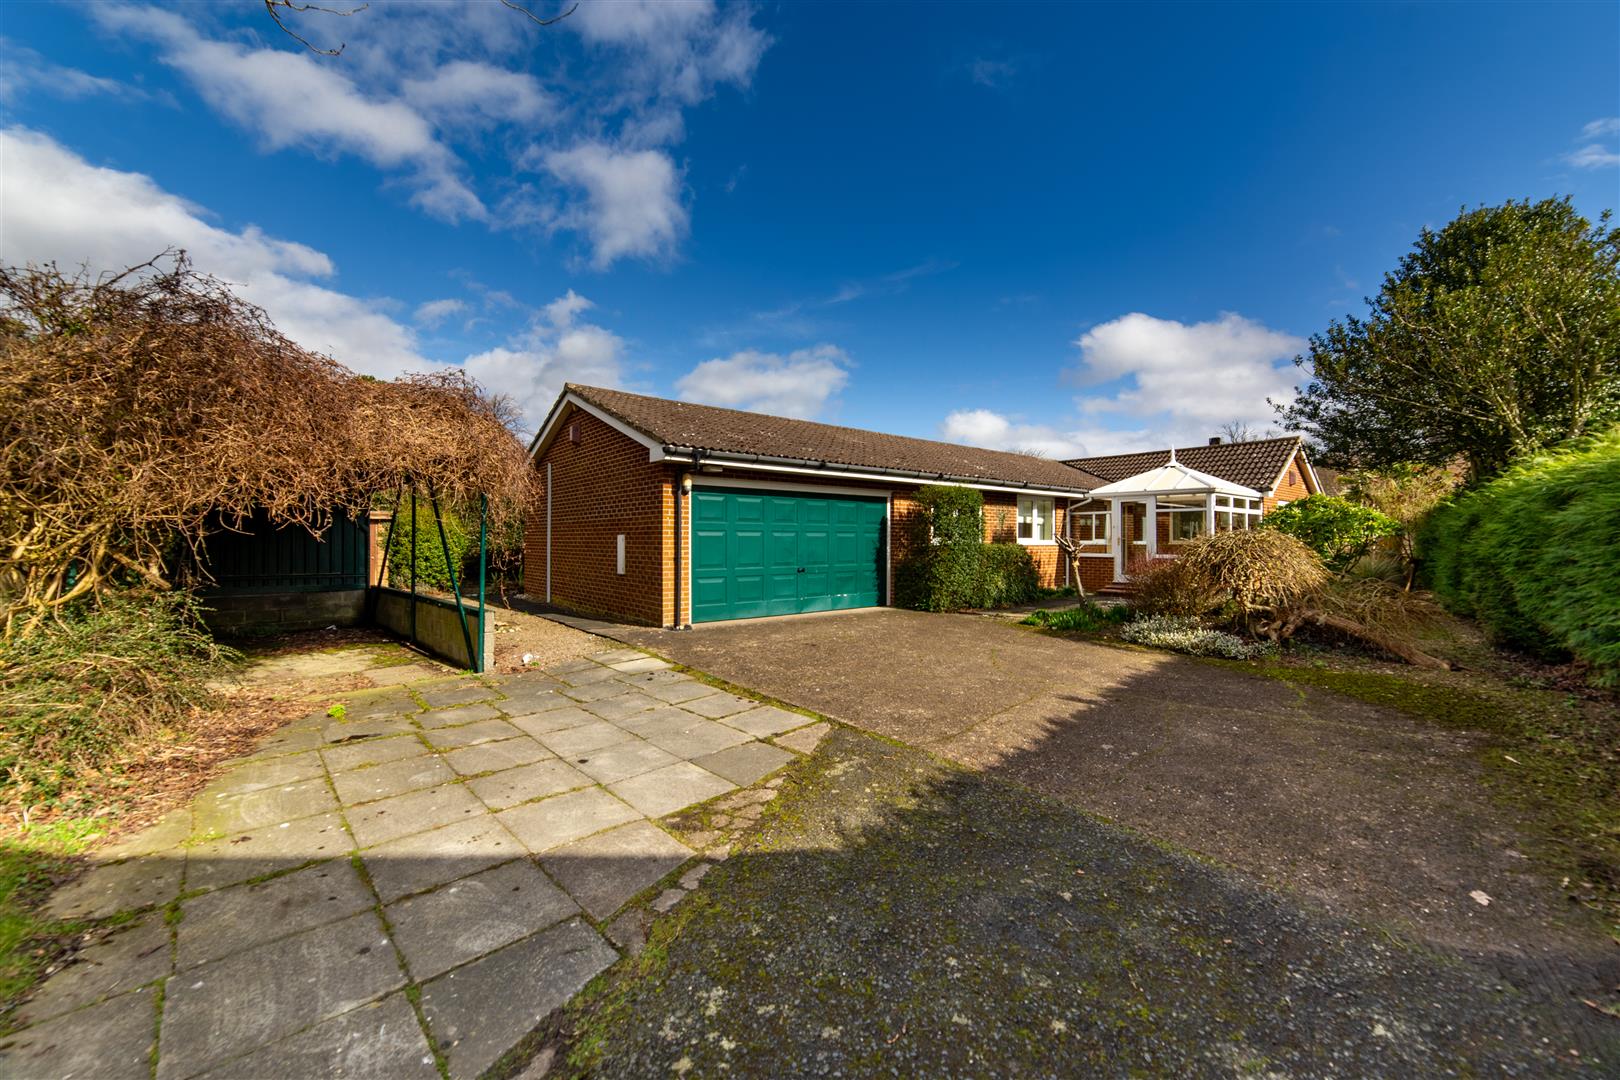 3 bed detached bungalow for sale in The Green, Morpeth, NE65